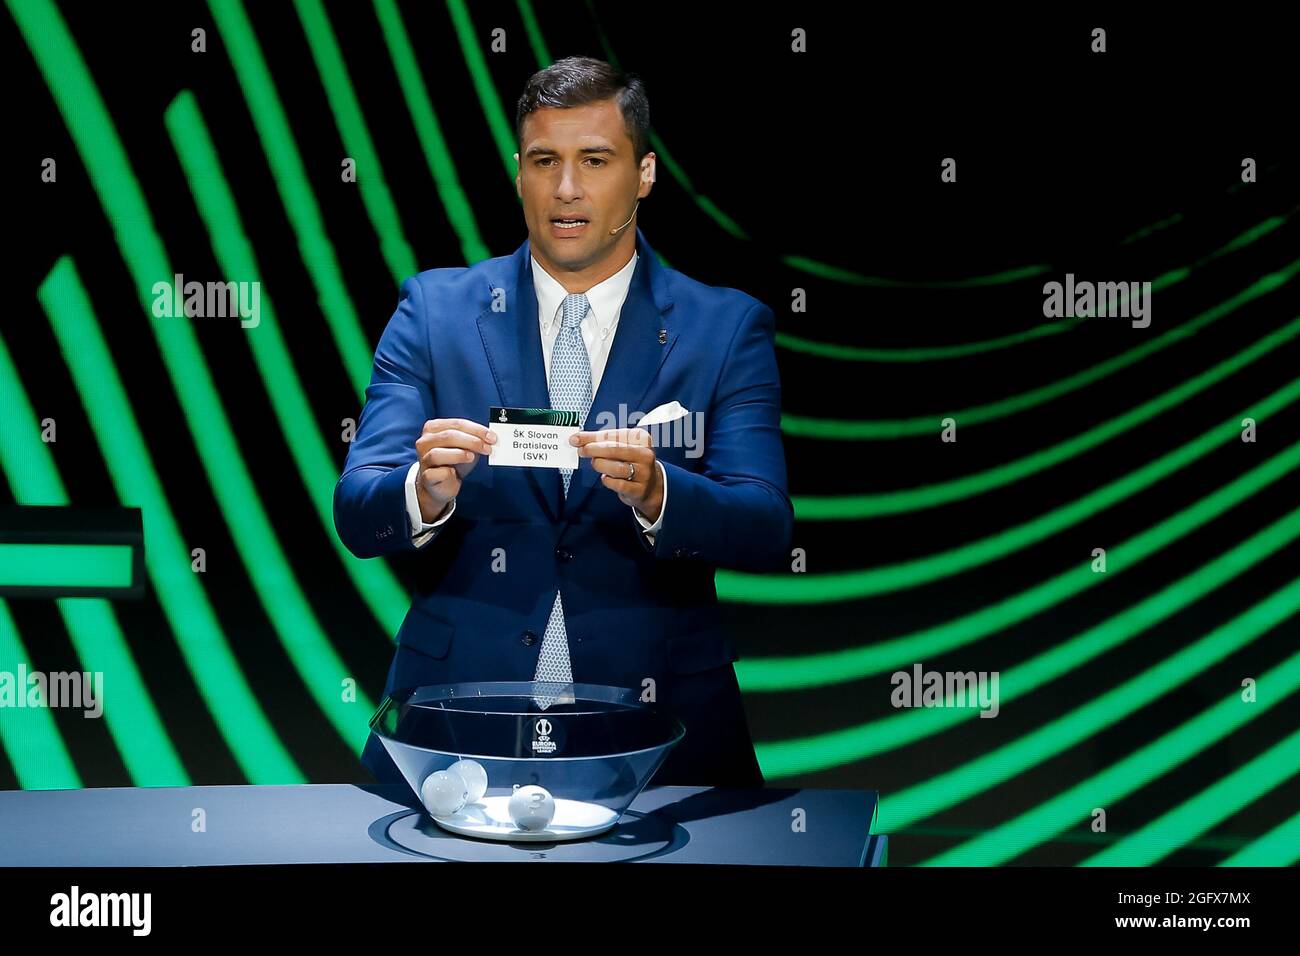 Istanbul, Turkey. 27th Aug, 2021. ISTANBUL, TURKEY - AUGUST 27: Former Player Lorik Cana draws out the card of SK Slovan Bratislava during the UEFA Conference League 2021/22 Group Stage Draw at the Halic Congress Center on August 27, 2021 in Istanbul, Turkey. (Photo by Orange Pictures) Credit: Orange Pics BV/Alamy Live News Stock Photo